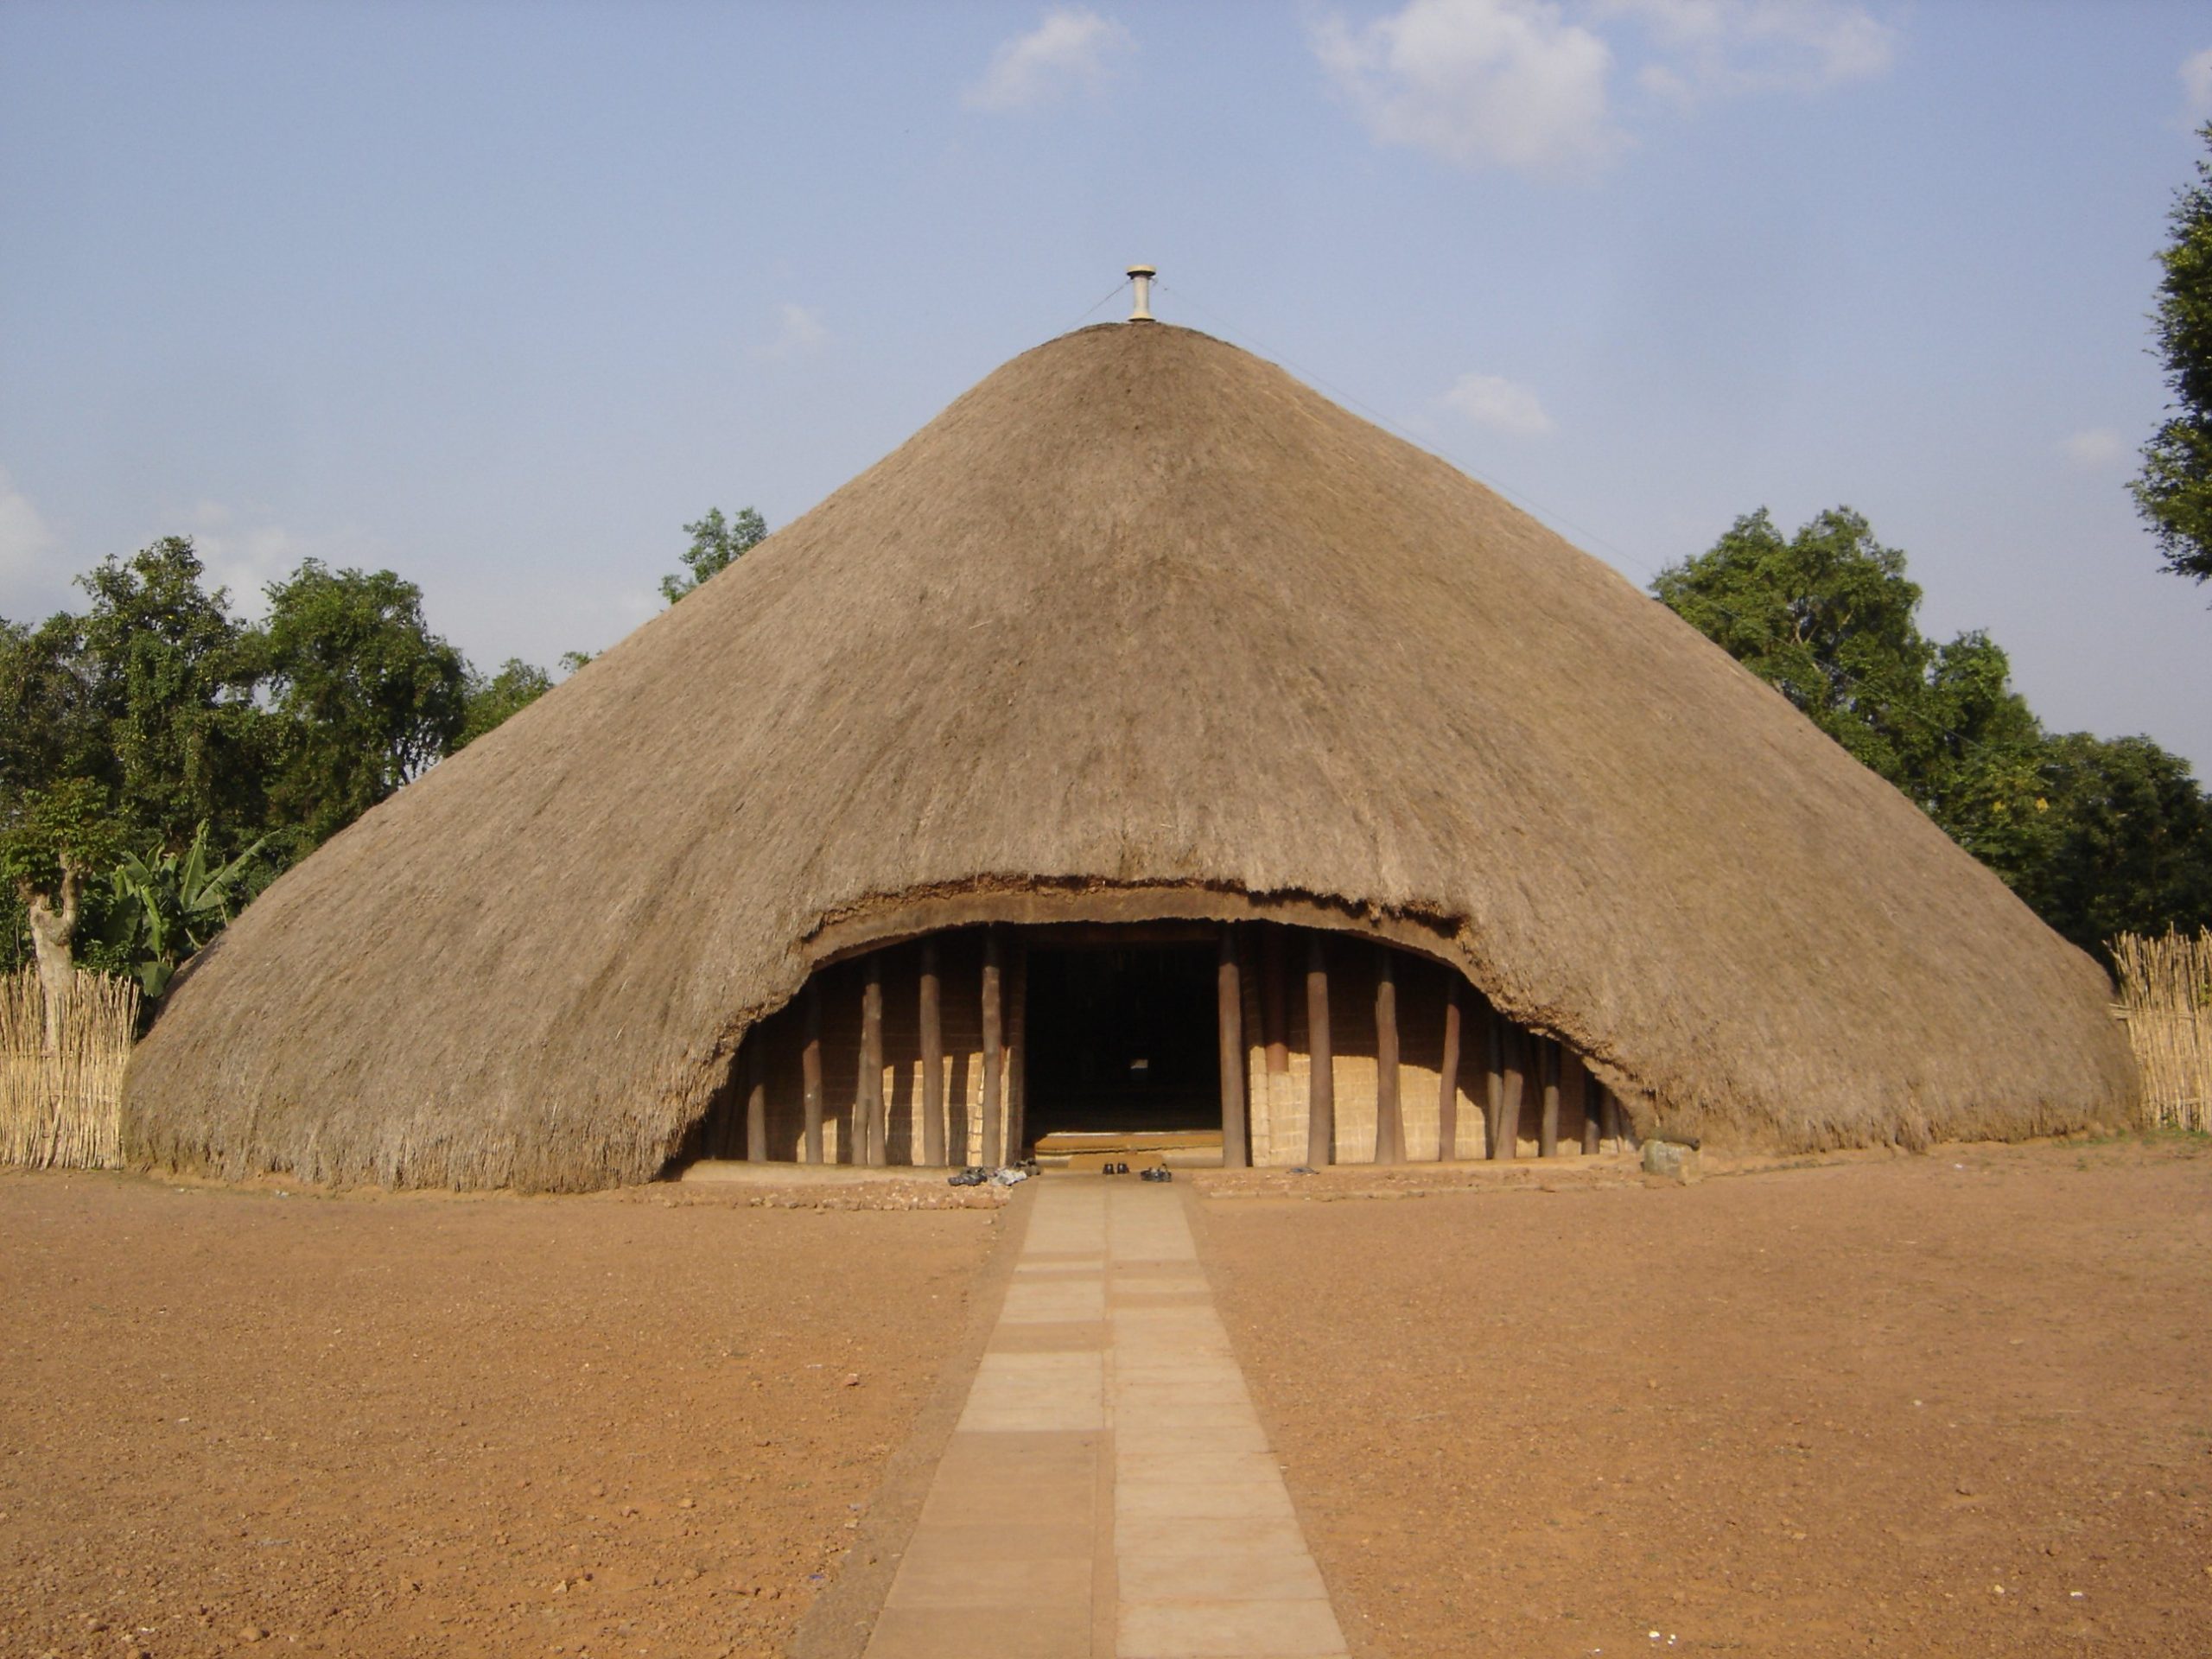 Places to go for Cultural tours in Uganda